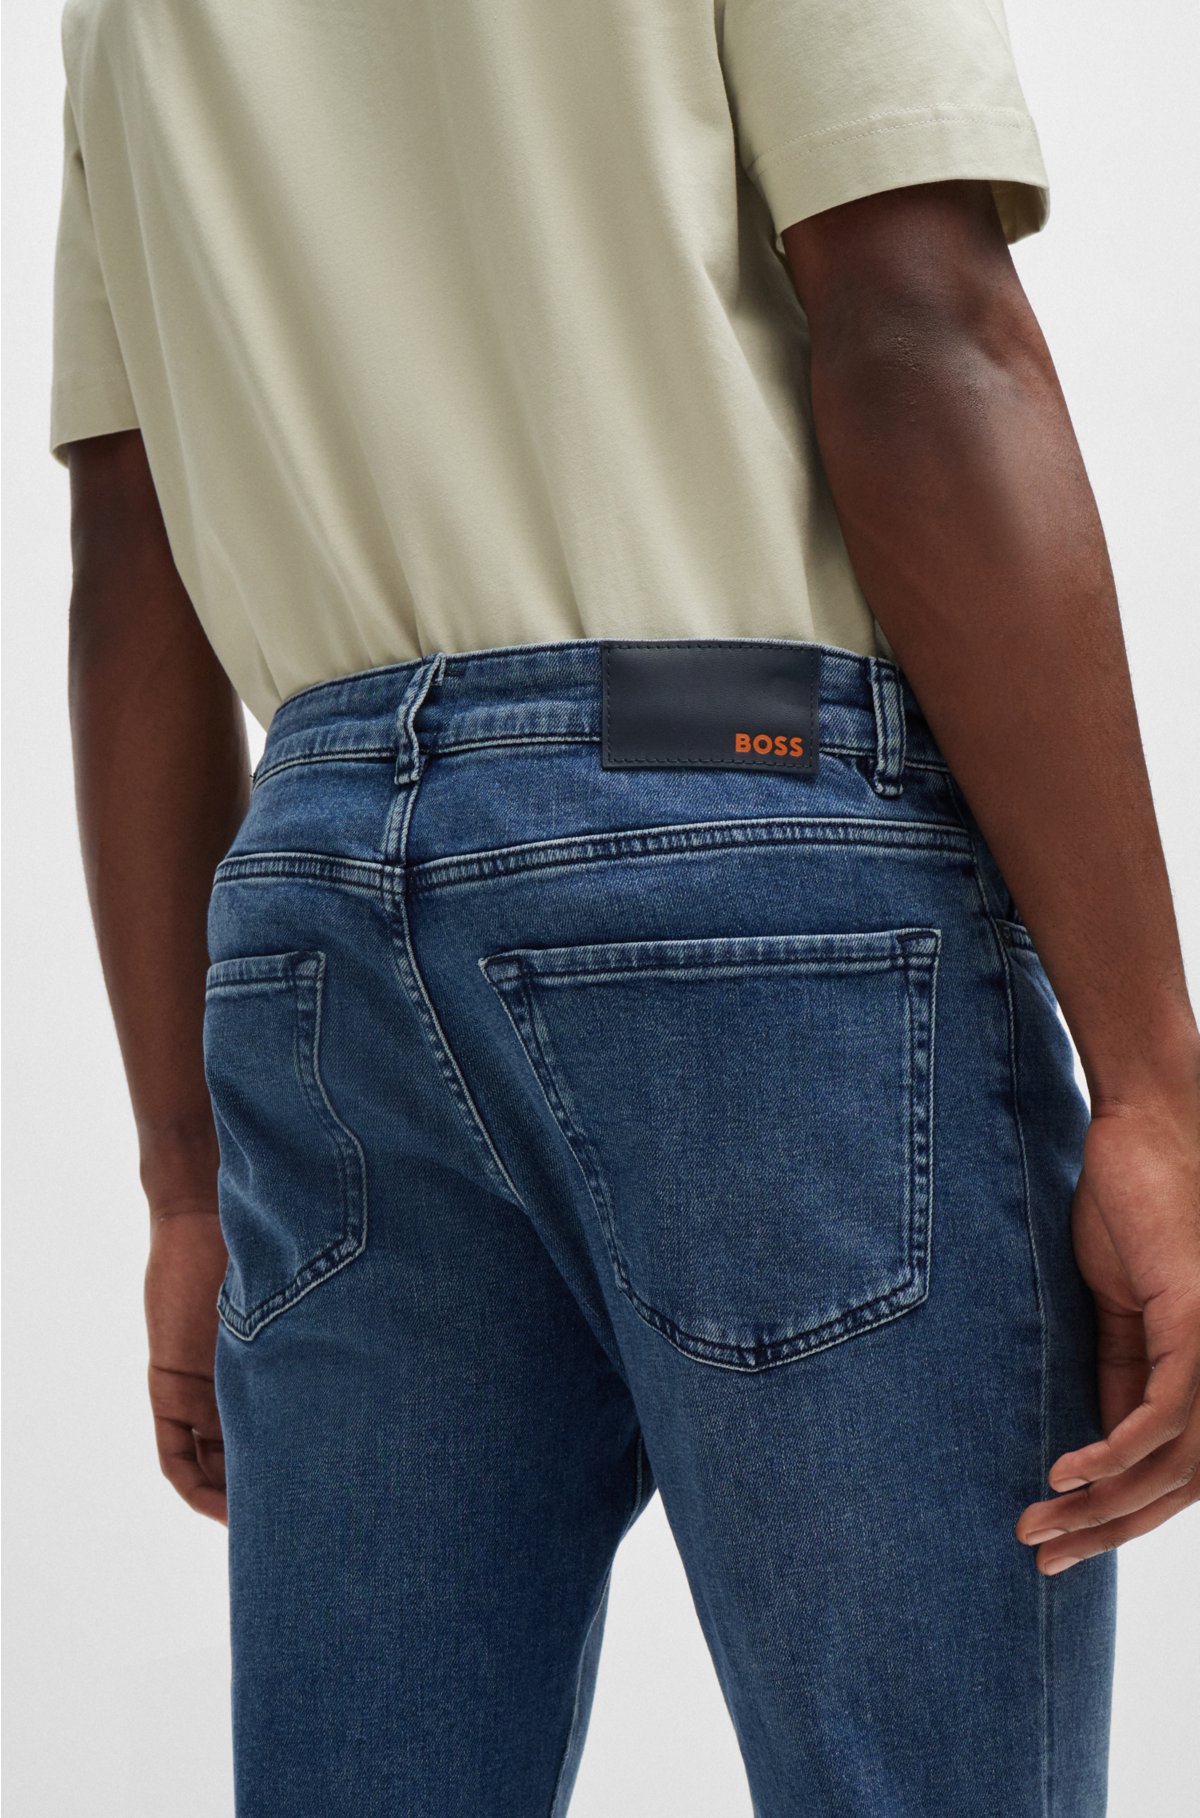 LEE BOSS OF THE ROAD JEANS – Men's Clothing Store